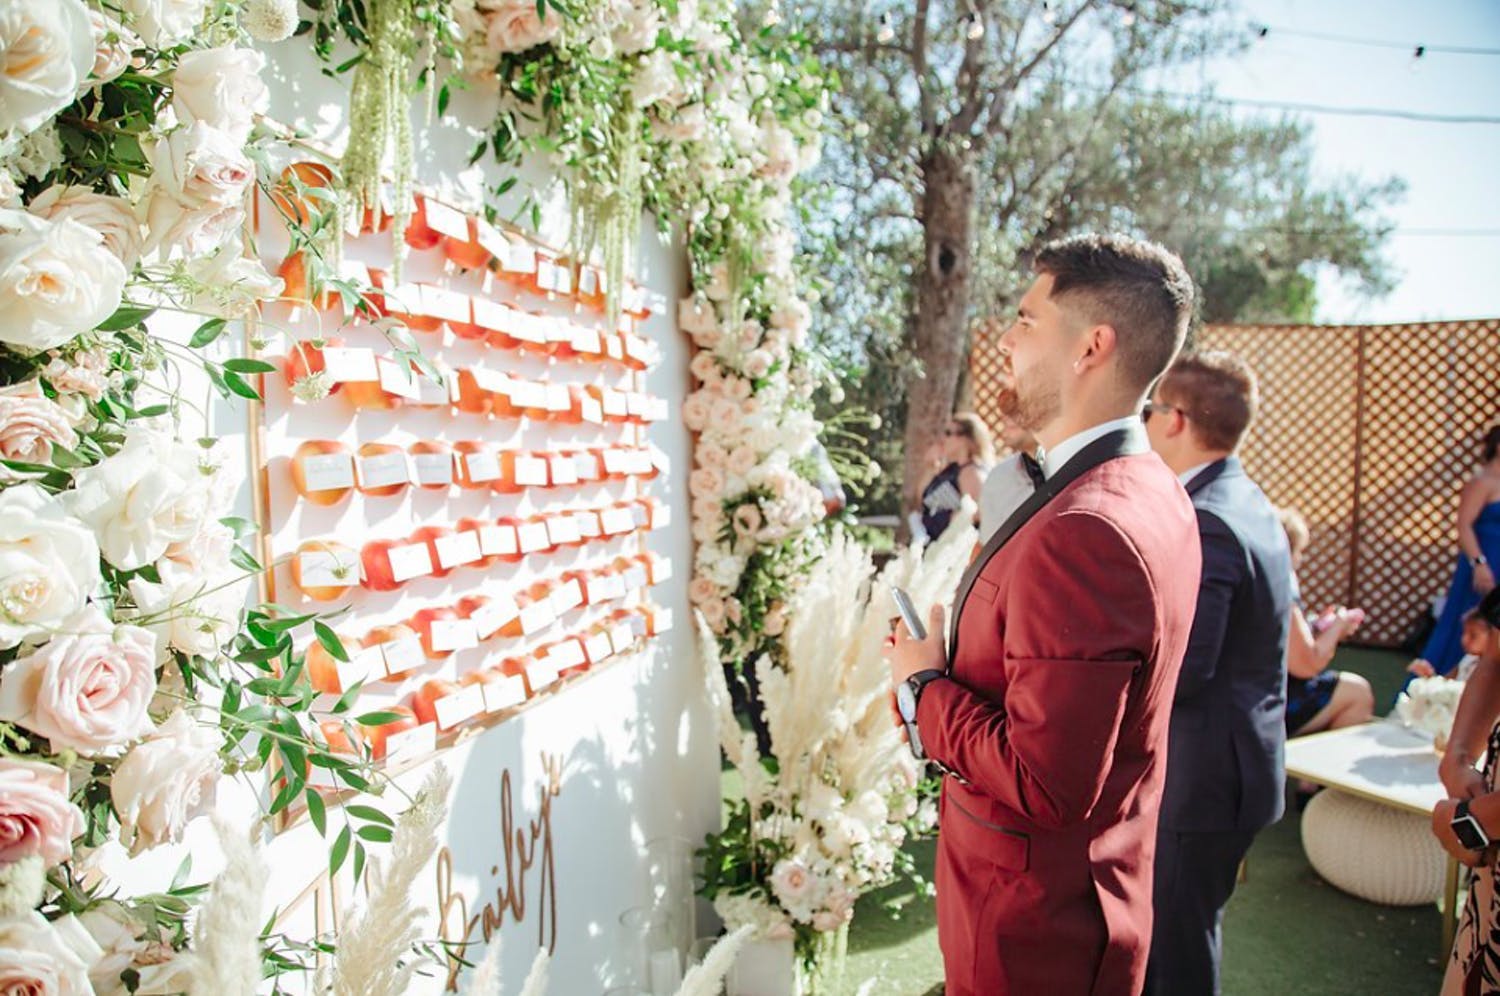 Man in Red Jacket Looks For His Wedding Seating Assignment at Floral-Framed Sign With Oranges and Place Cards | PartySlate